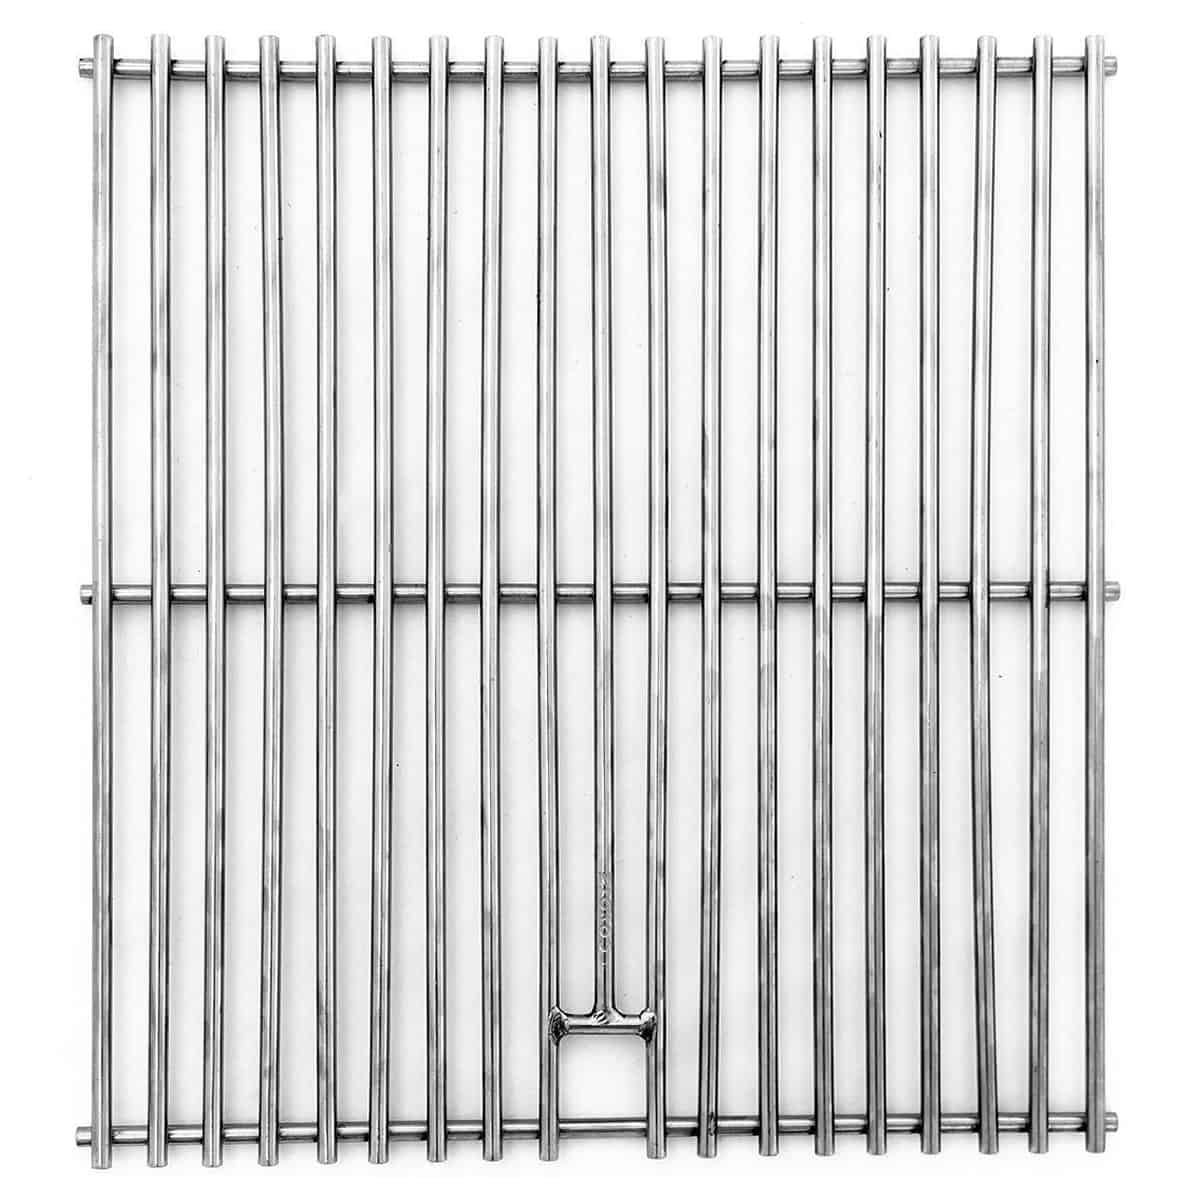 Coyote S-Series 30 Inch Freestanding 3-Burner Grill Stainless Grate